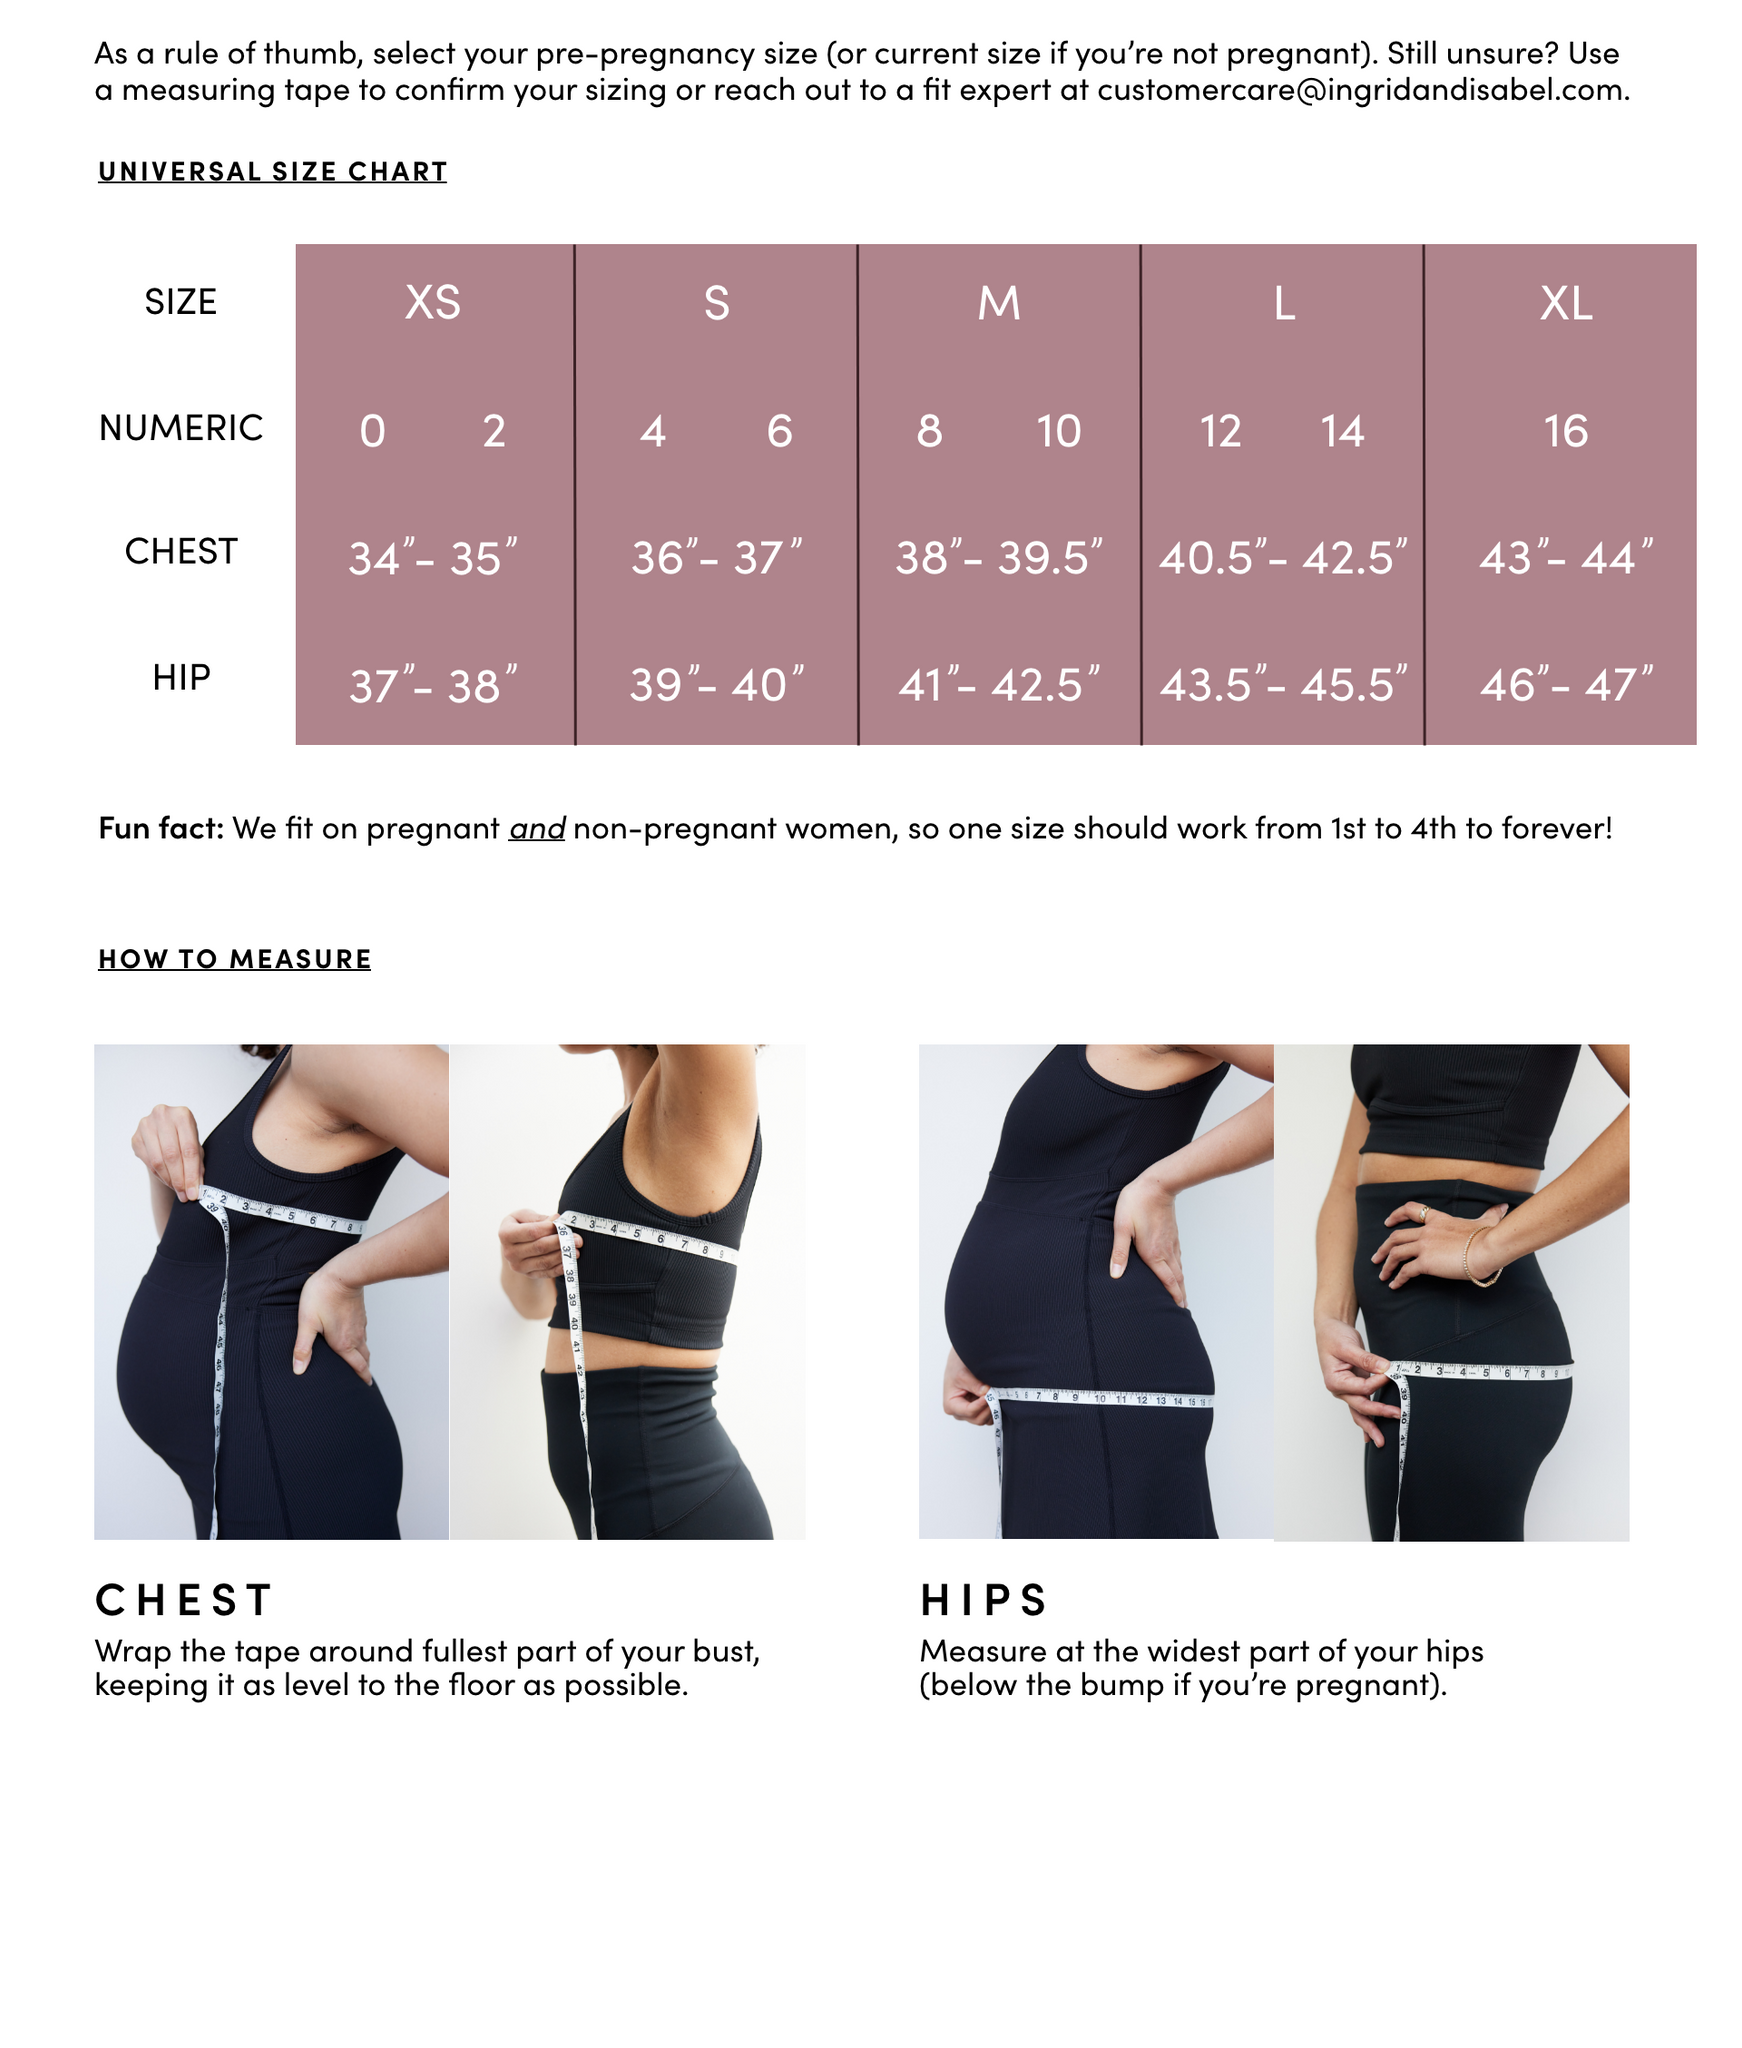 https://cdn.shopify.com/s/files/1/0002/0578/3098/files/For_sizing_chart_on_website5_2048x2048.png?v=1680136005